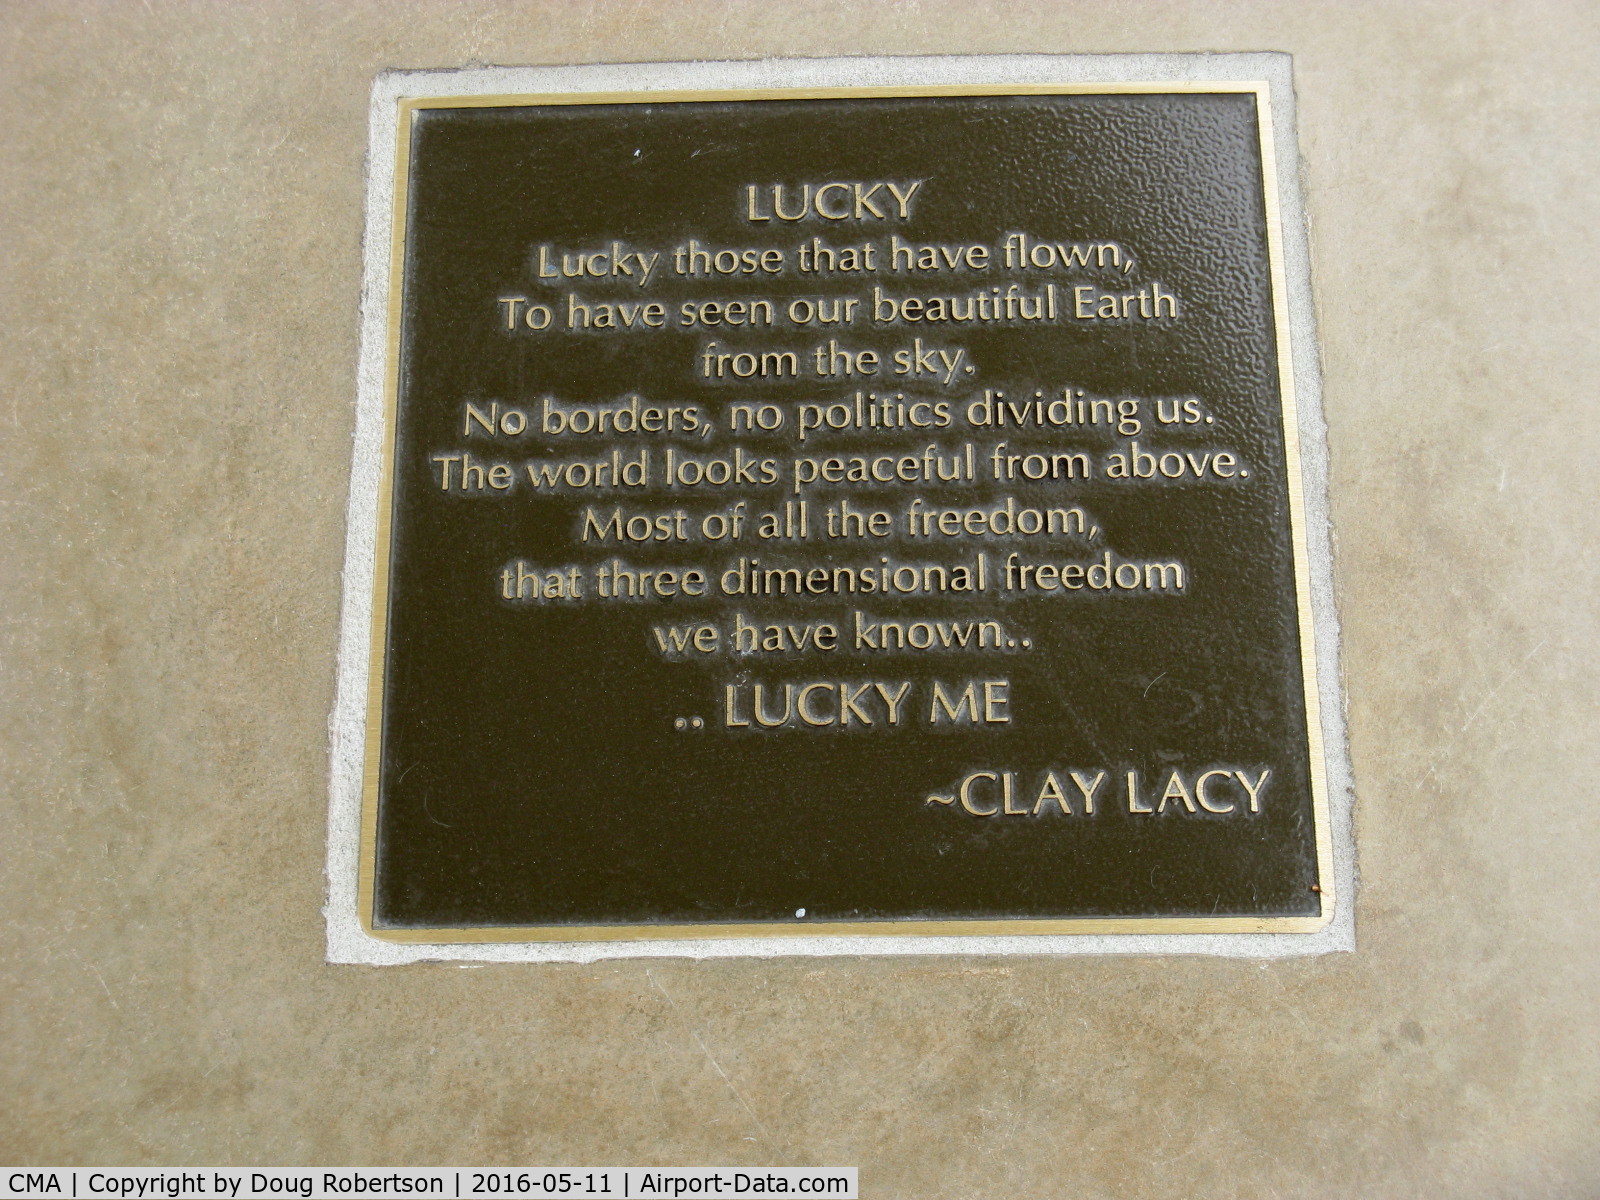 Camarillo Airport (CMA) - Clay Lacy Tribute Plaque at CMA Aircraft View Park, Clay is retired United Airlines pilot with Jet FBOs at KVNY & KBFI. Owns a Douglas DC-3C in UA period livery among others and has over 50,000 flight hours!